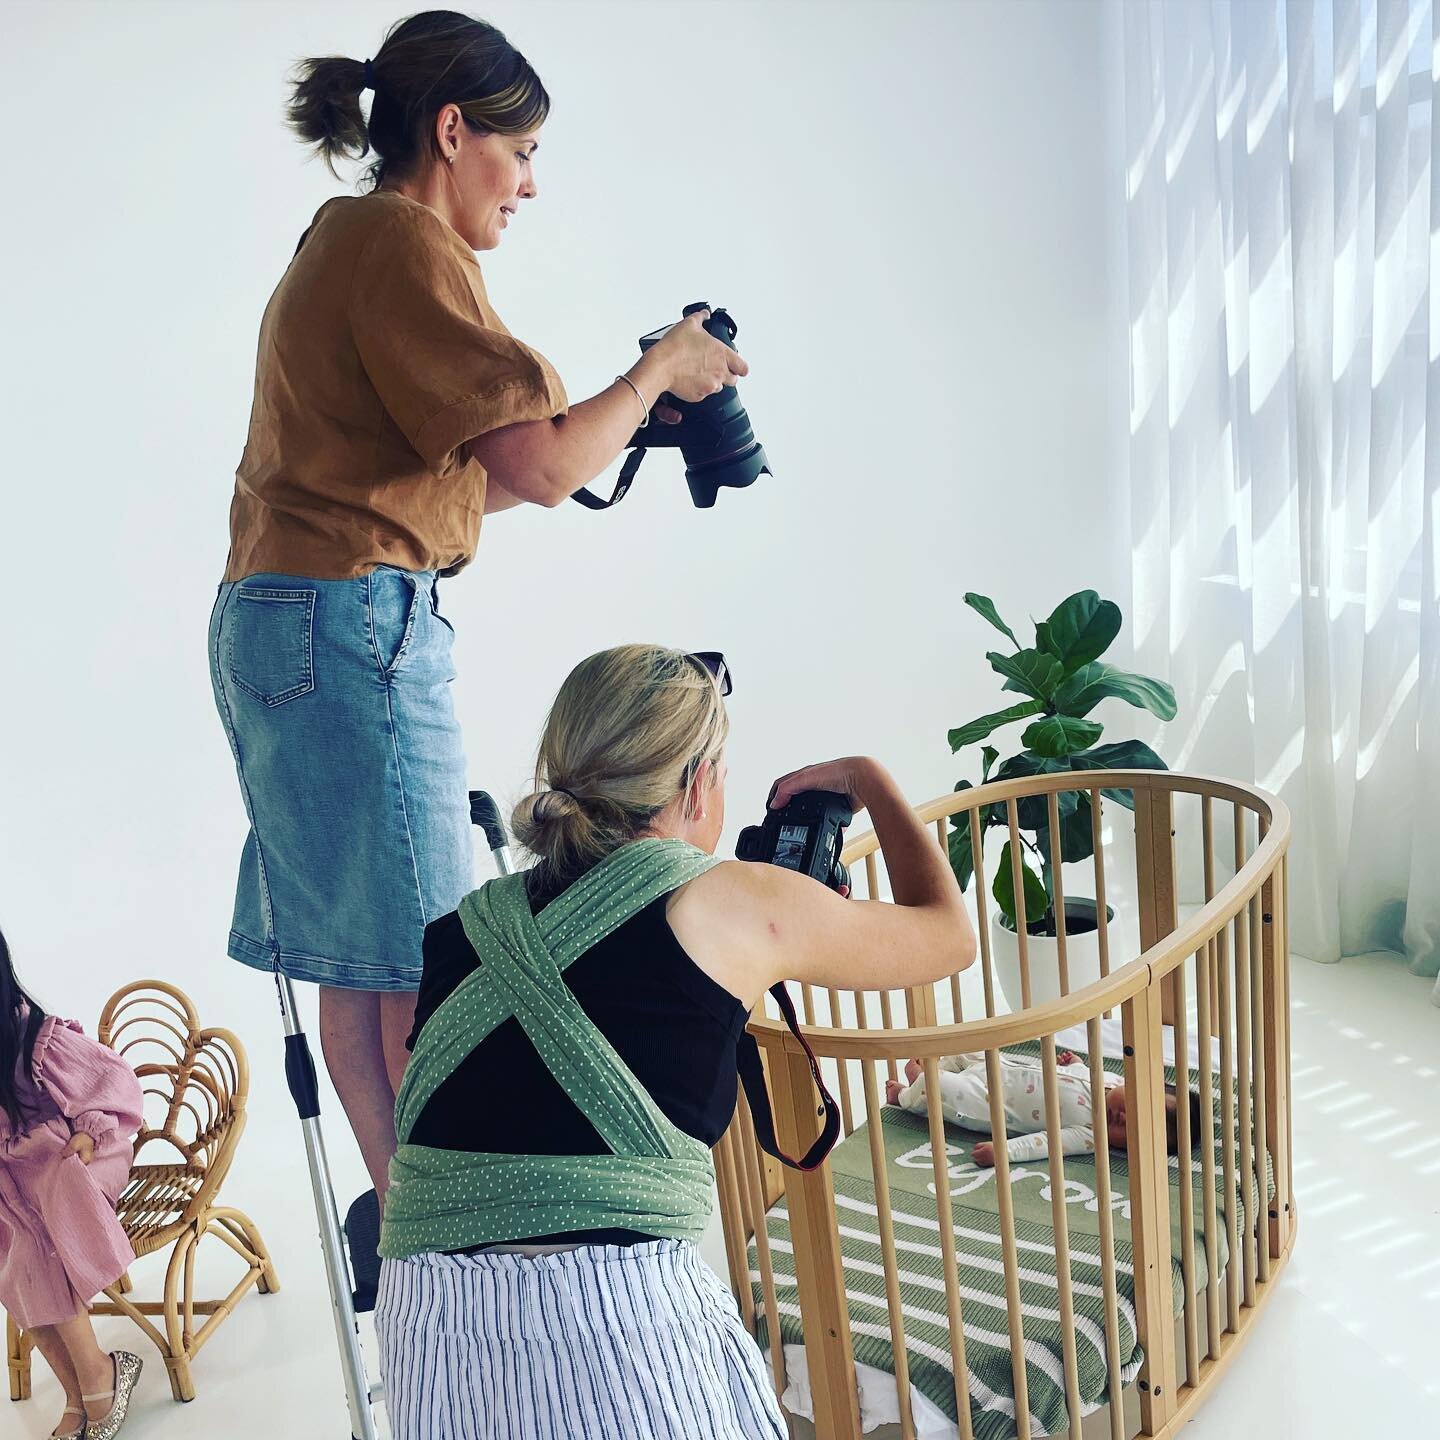 We have some beautiful brands and amazing photographers hire our stunning studio, some of our faves shooting new product this week @kynd_baby @namely_co 📸 @_studiocamille